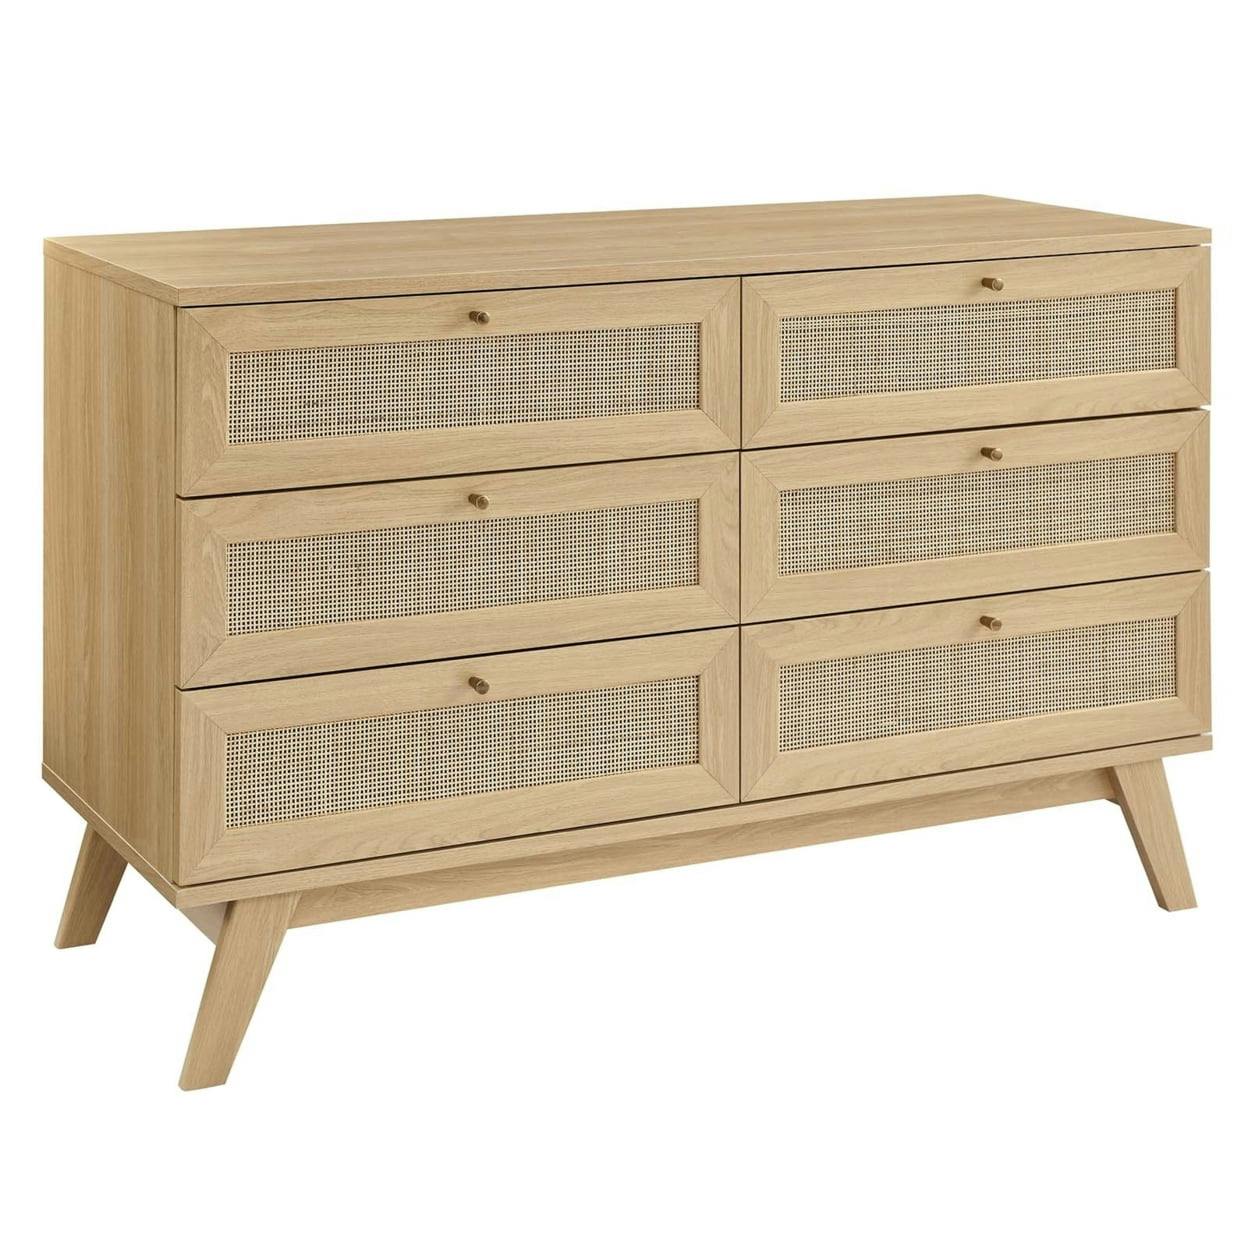 Soma 6-Drawer Double Dresser with Rattan Weave - Oak